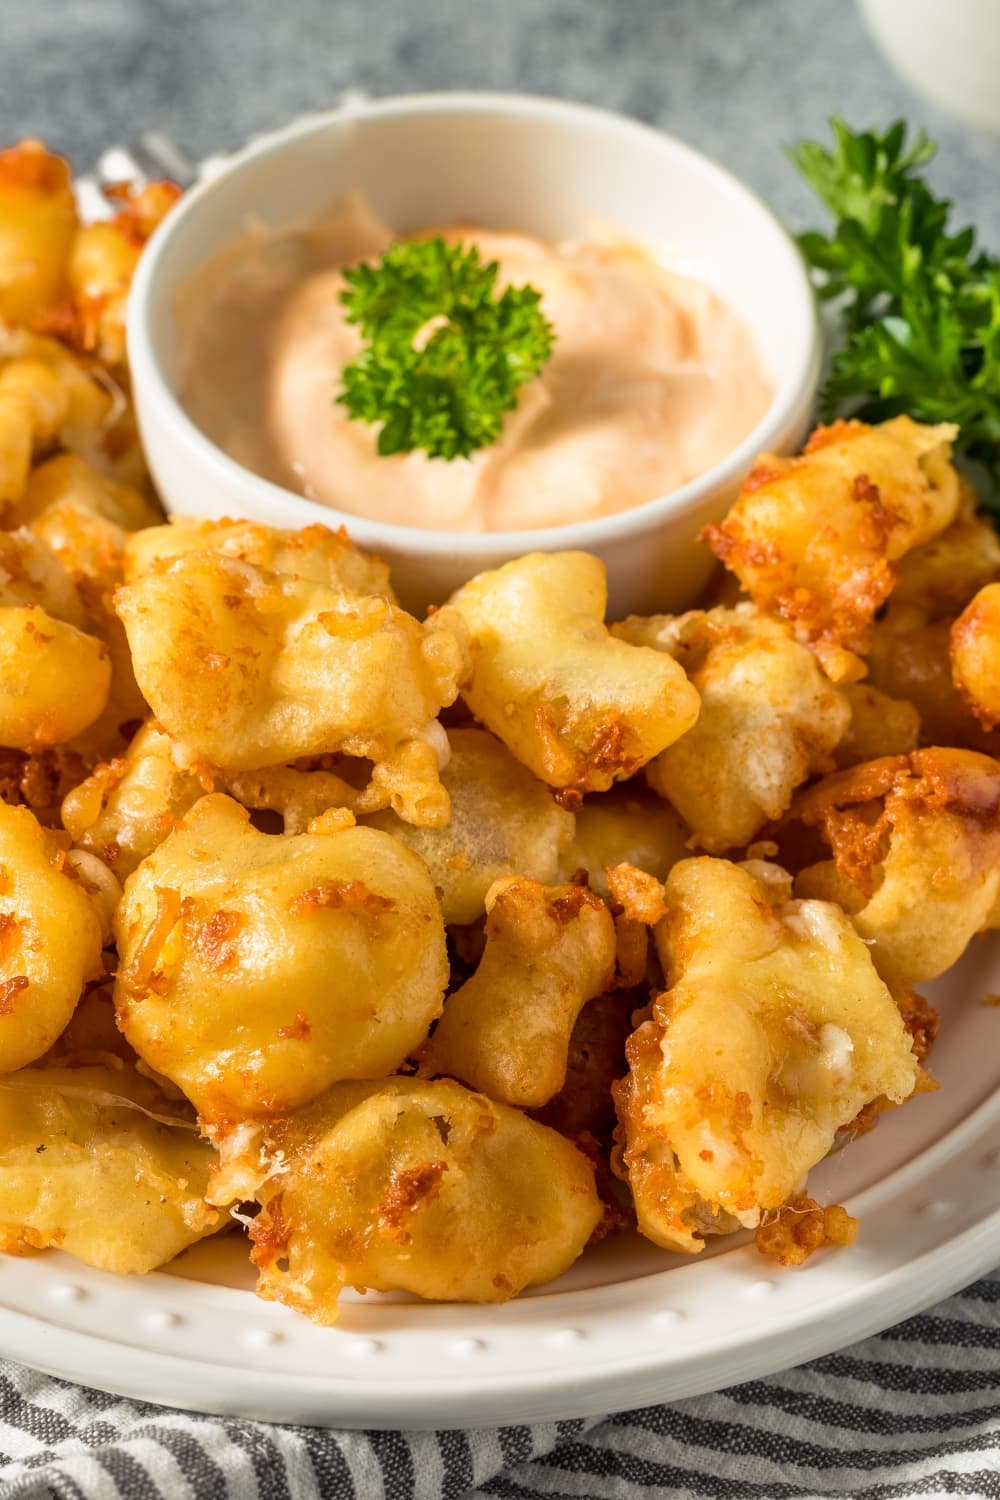 Bite Size Cheese Curds with Dipping Sauce on a Small Bowl in the Middle of the Plate